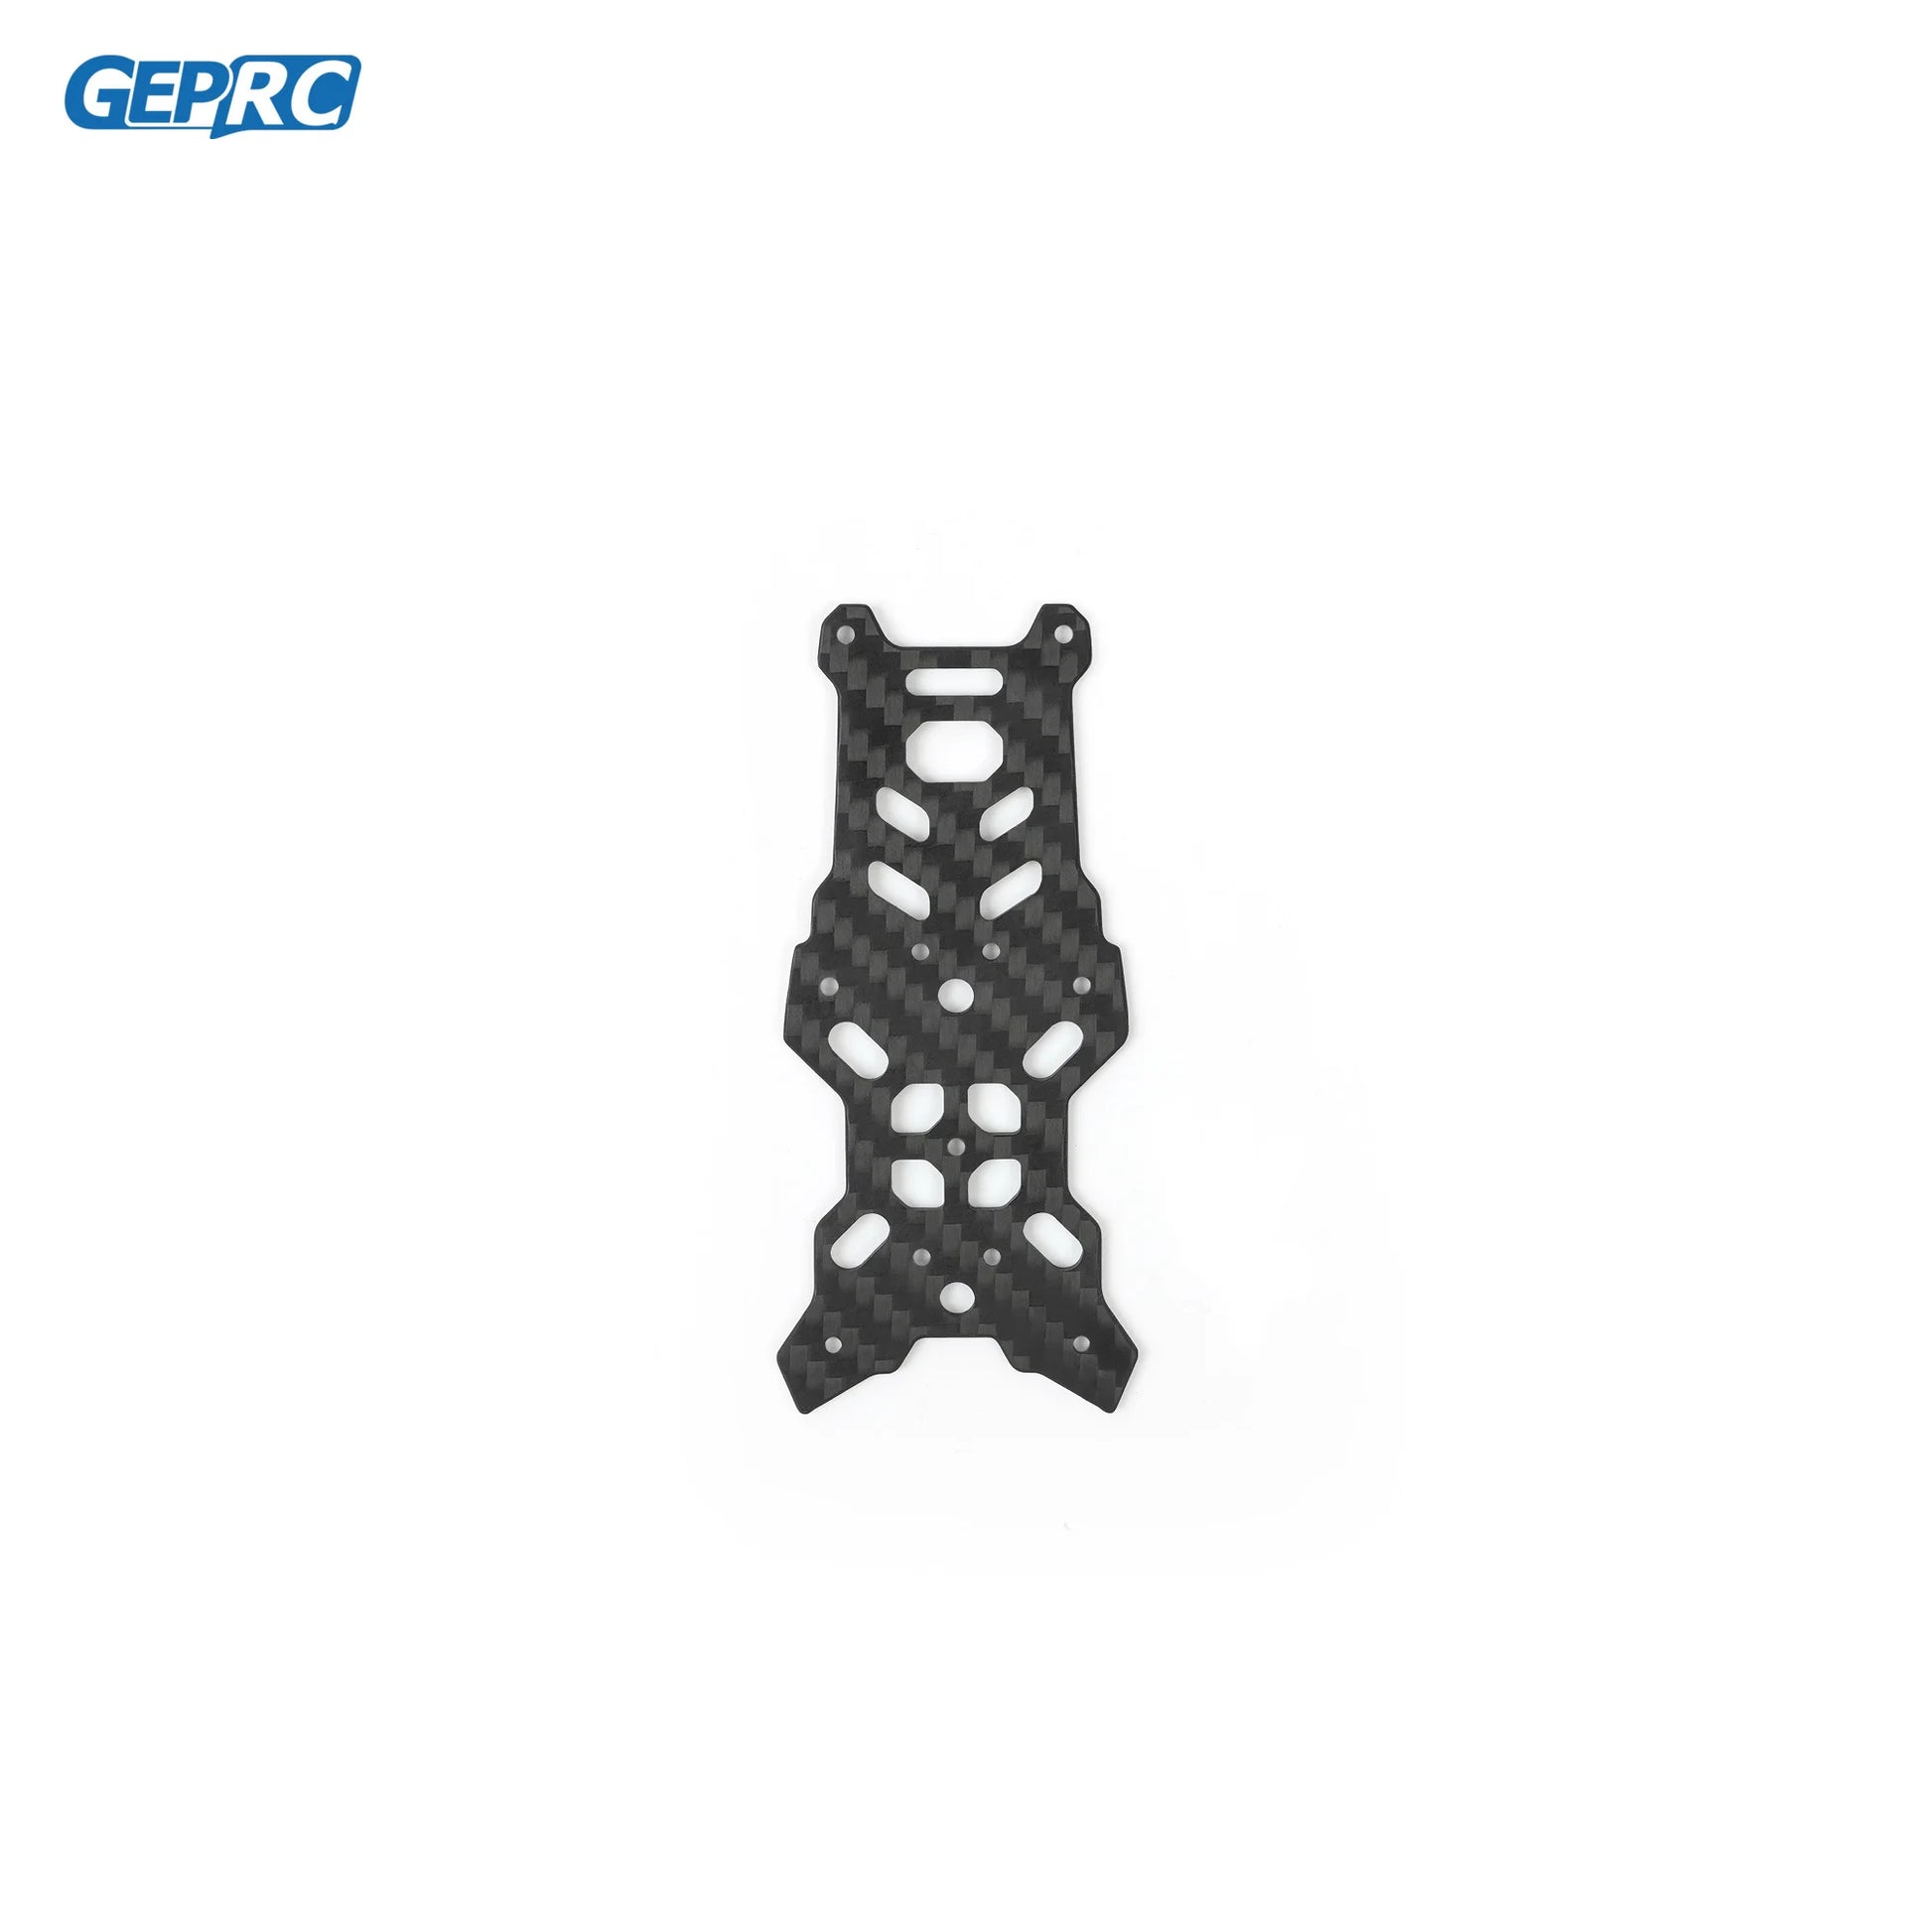 GEPRC GEP-Tern-LR40 Frame Parts - 4inch Propeller Accessory Screw Quadcopter Frame FPV Freestyle RC Racing Drone Tern-LR40